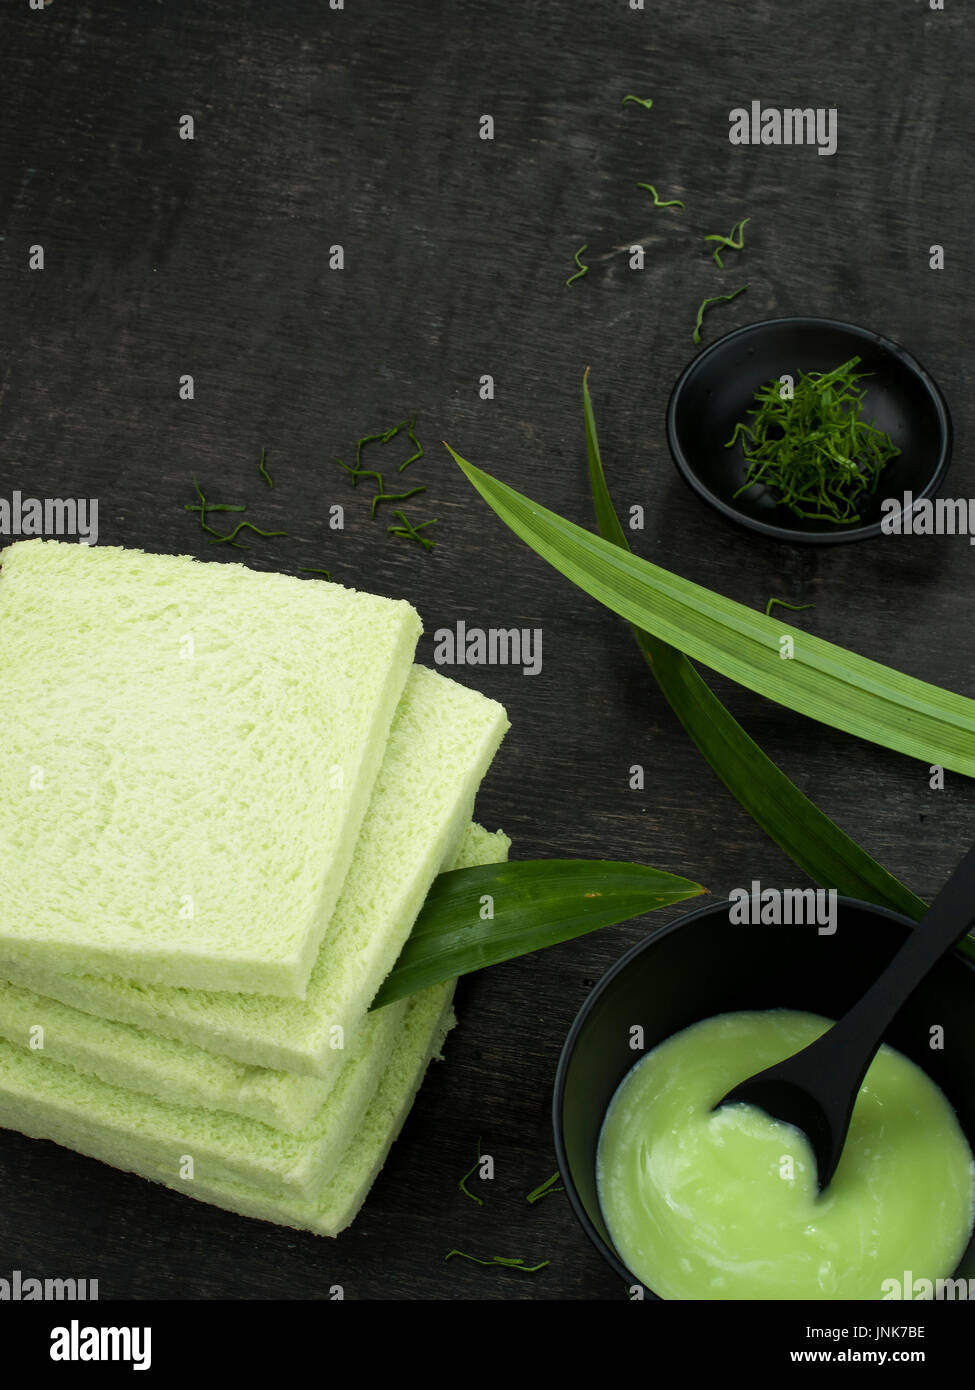 pandanus leaves mixers food product for healthy care life style Stock Photo